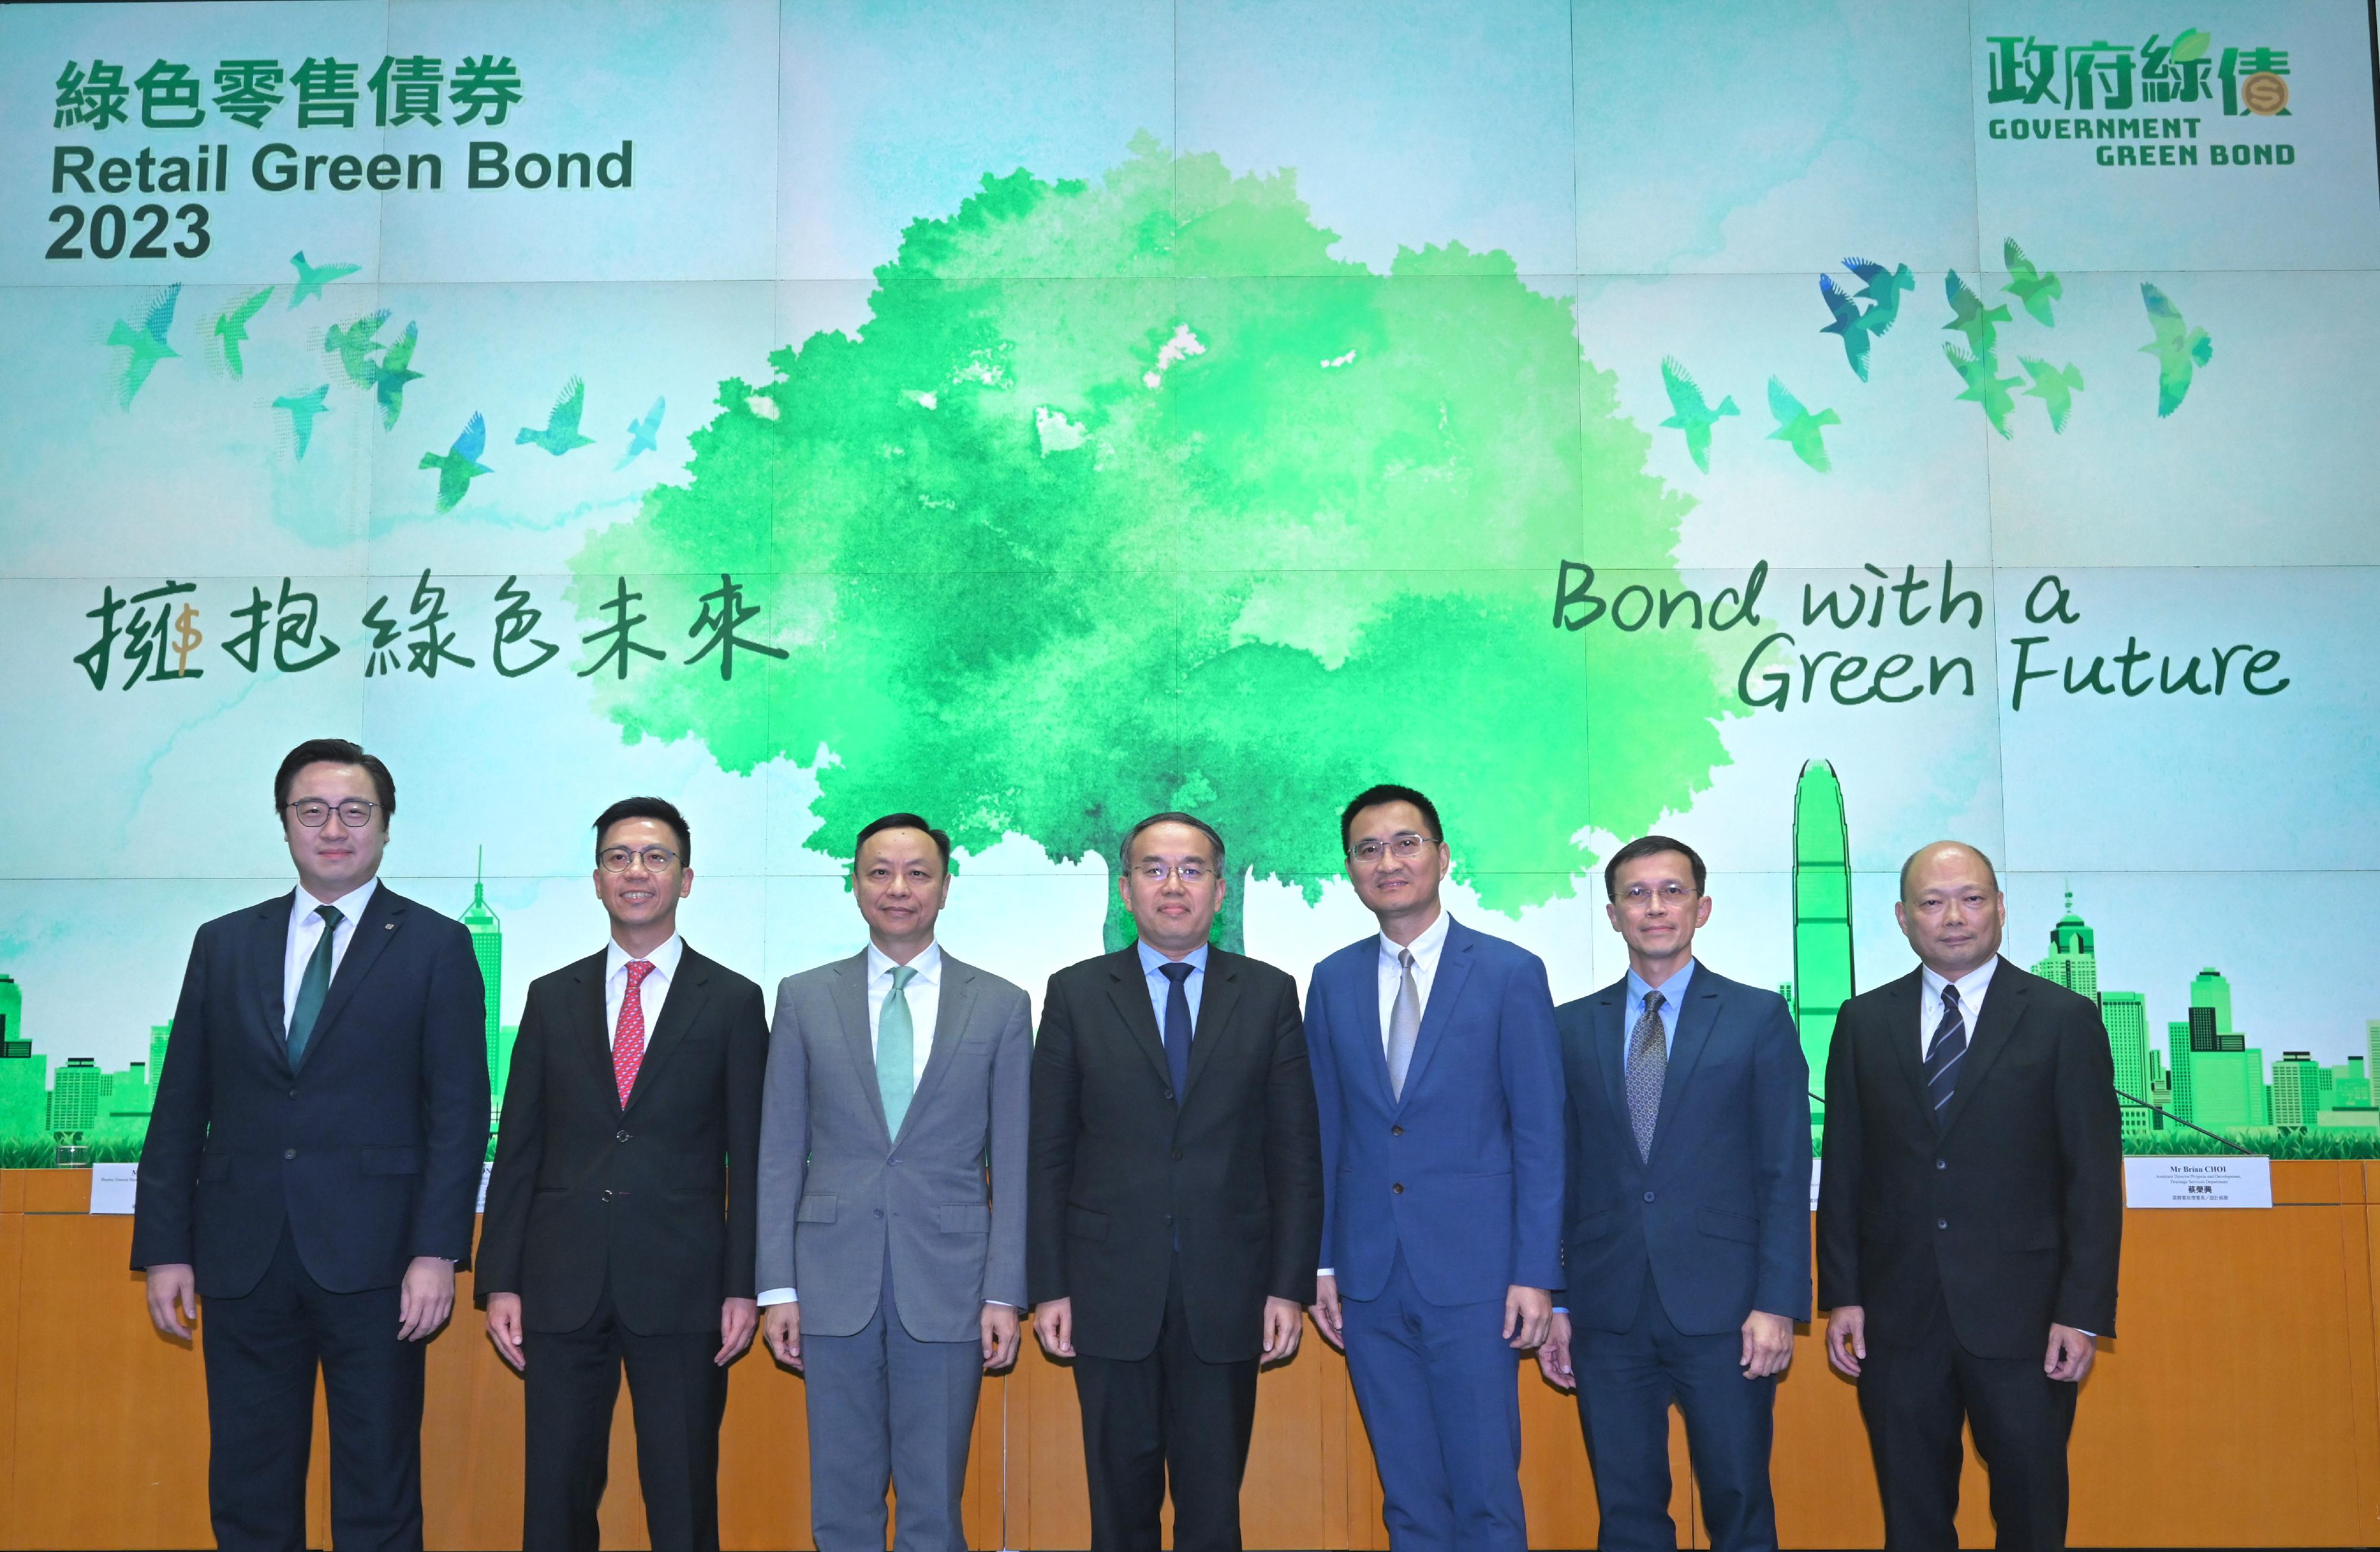 The Secretary for Financial Services and the Treasury, Mr Christopher Hui, today (September 5) hosts a press conference on the launch of retail green bond. Photo shows Mr Hui (centre); Deputy Chief Executive of the Hong Kong Monetary Authority Mr Darryl Chan (third left); the Commissioner for Climate Change, Environment and Ecology Bureau, Mr Wong Chuen-fai (third right); the Acting Principal Assistant Secretary (Project Capability and Strategy), Development Bureau, Mr Frankie Fung (second right); the Assistant Director/Projects and Development, Drainage Services Department, Mr Brian Choi (first right); the Head of Greater China FX Cash & EM Rates Trading, Global Markets, the Hongkong and Shanghai Banking Corporation Limited, Mr Wong Tsz-cheuk (second left); and the Deputy General Manager, Personal Digital Banking Product Department, Bank of China (Hong Kong), Mr Arnold Chow (first left). 